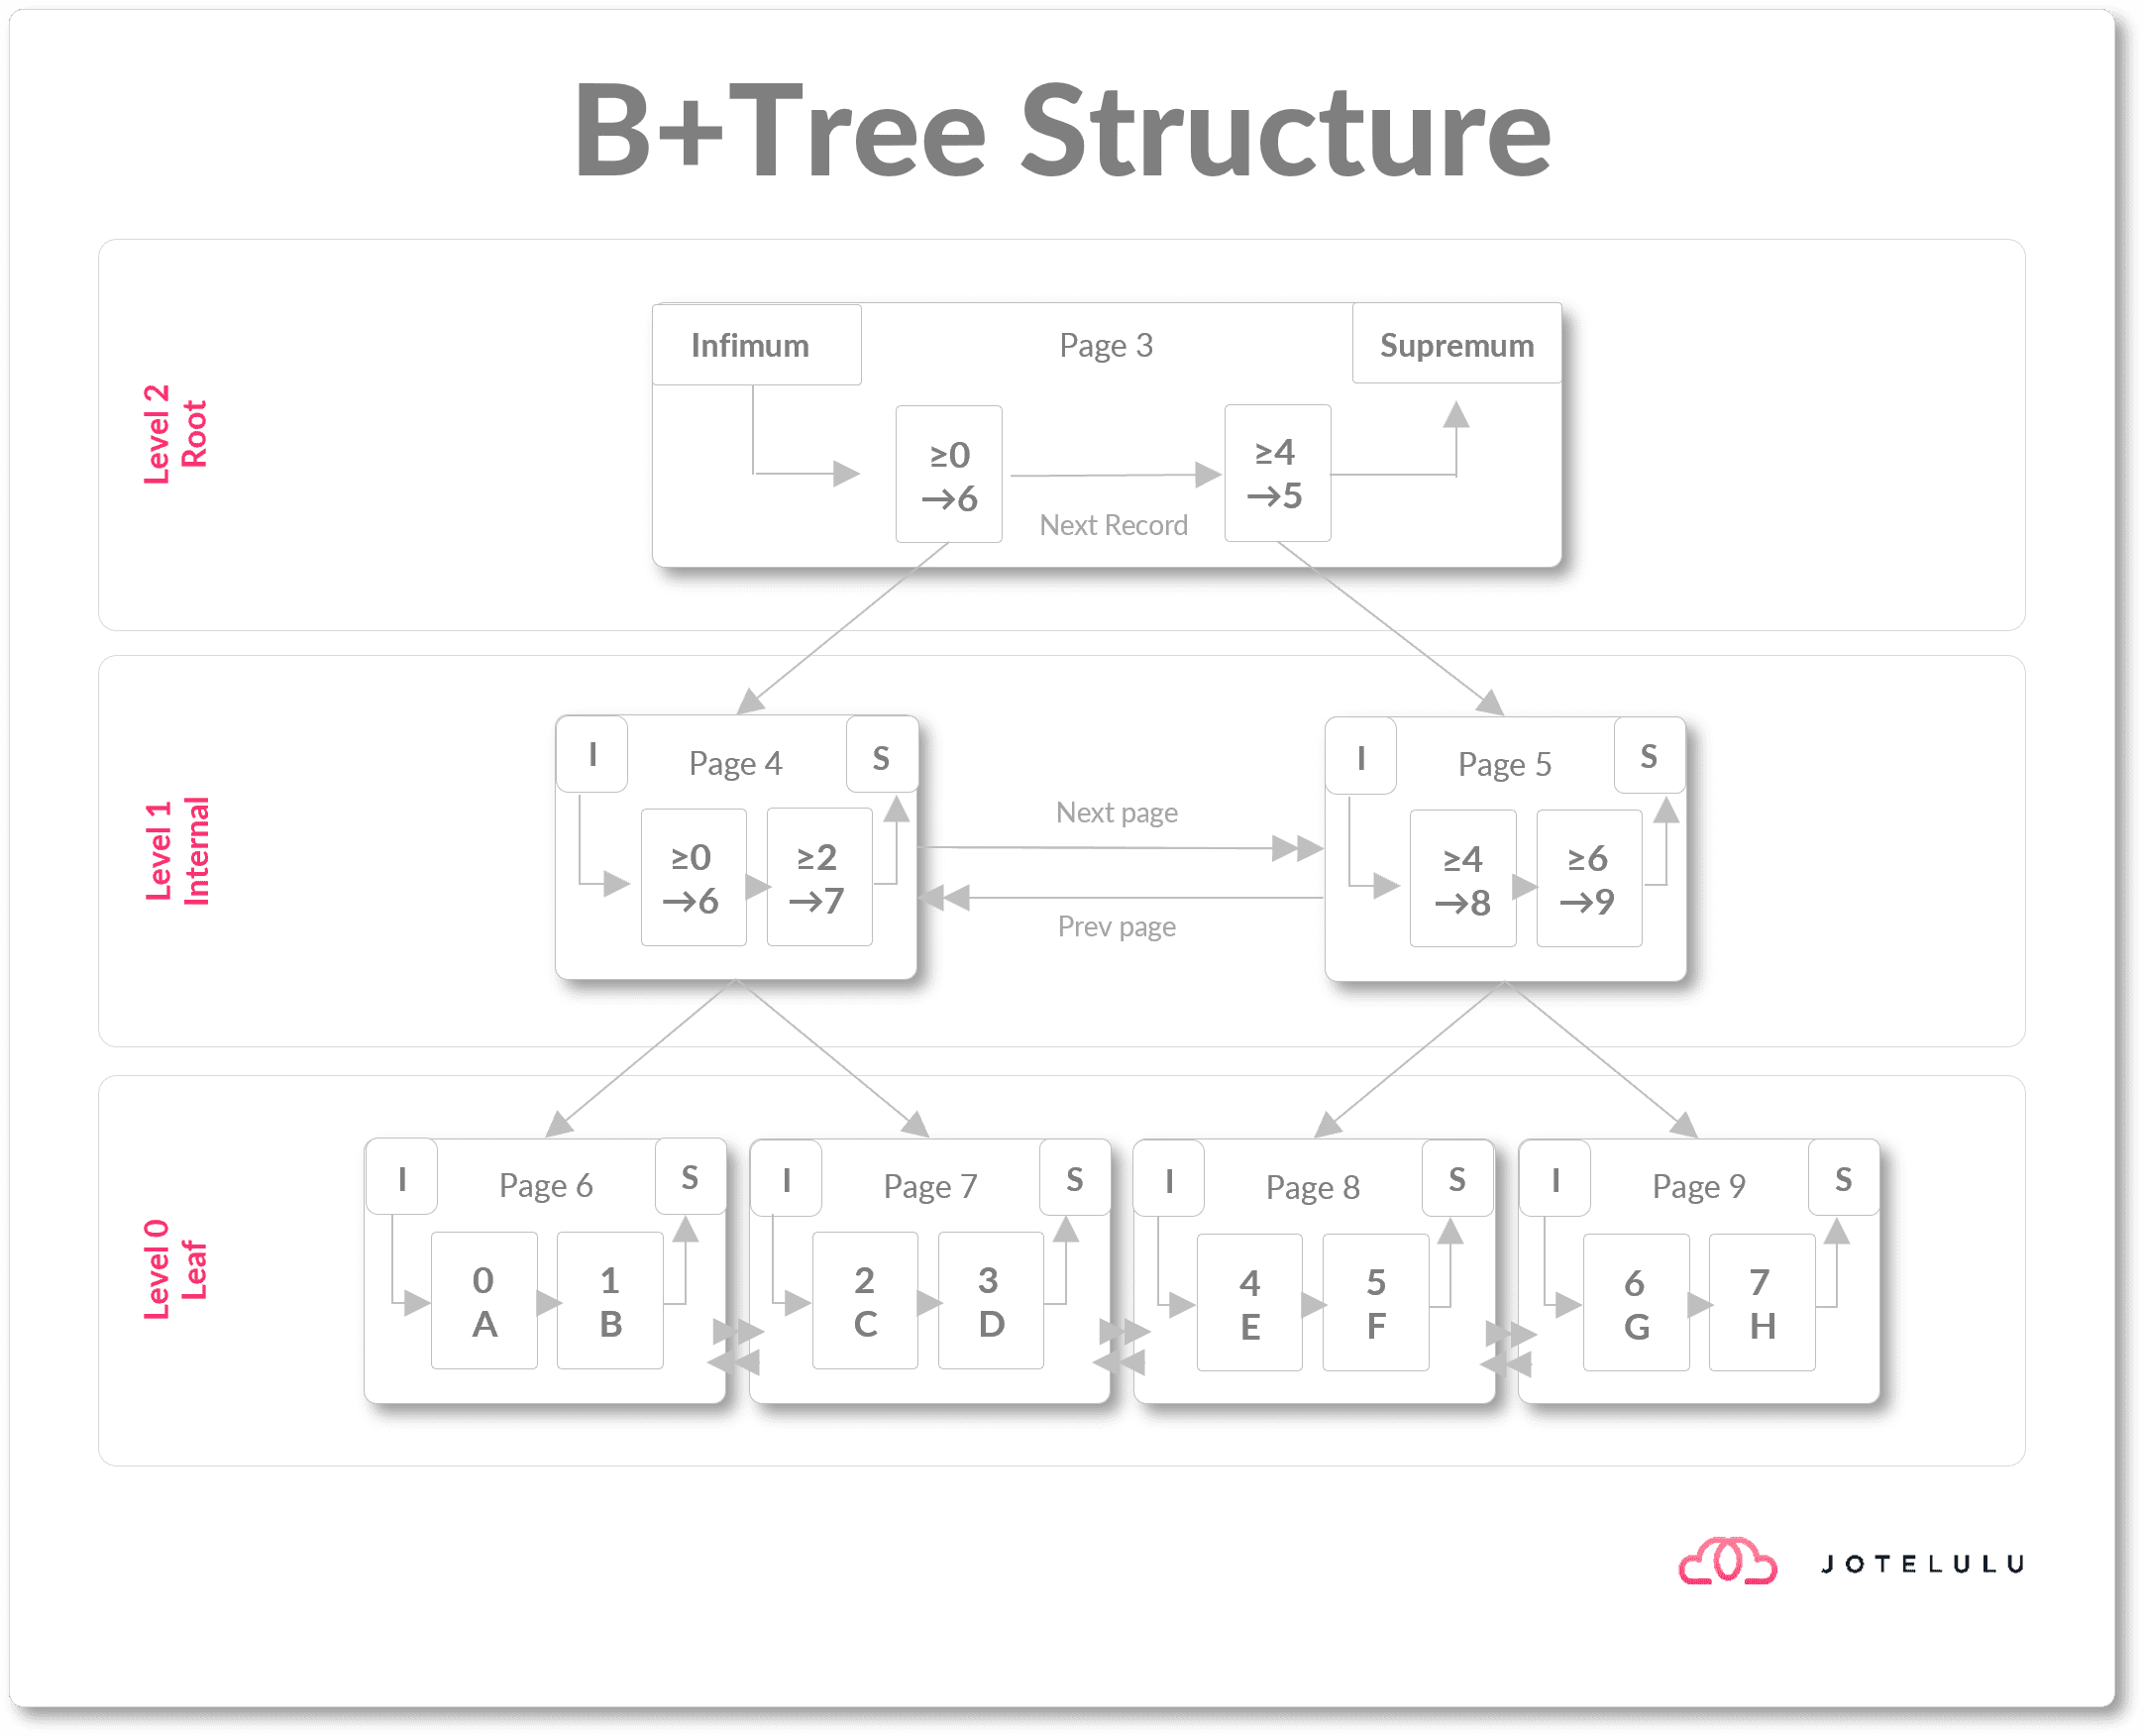 Image - B+Tree file structure